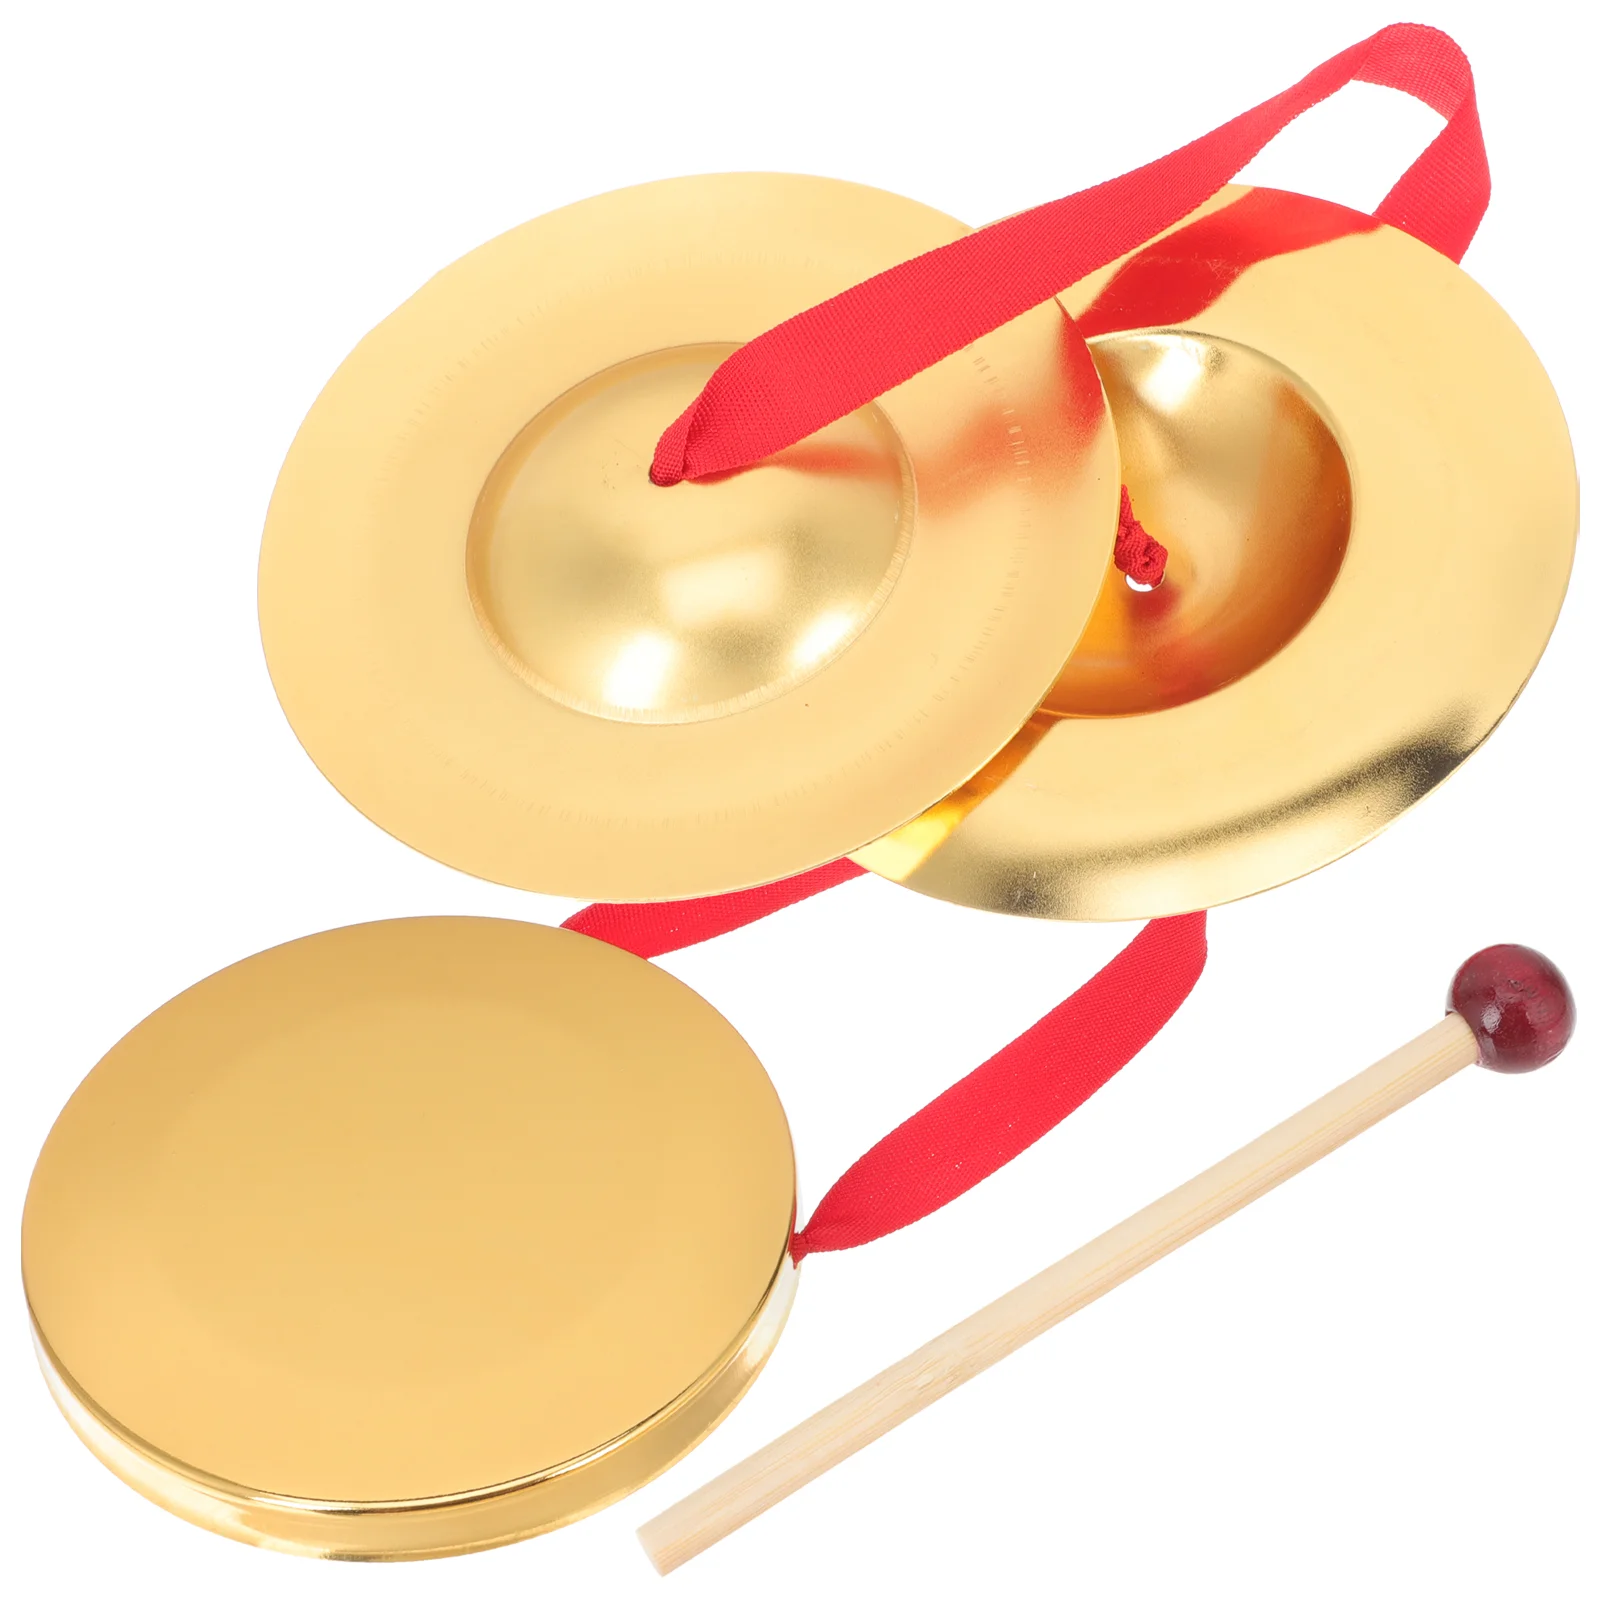 

1 Set of Interesting Percussion Toy Portable Percussion Instrument Handheld Gong Toy